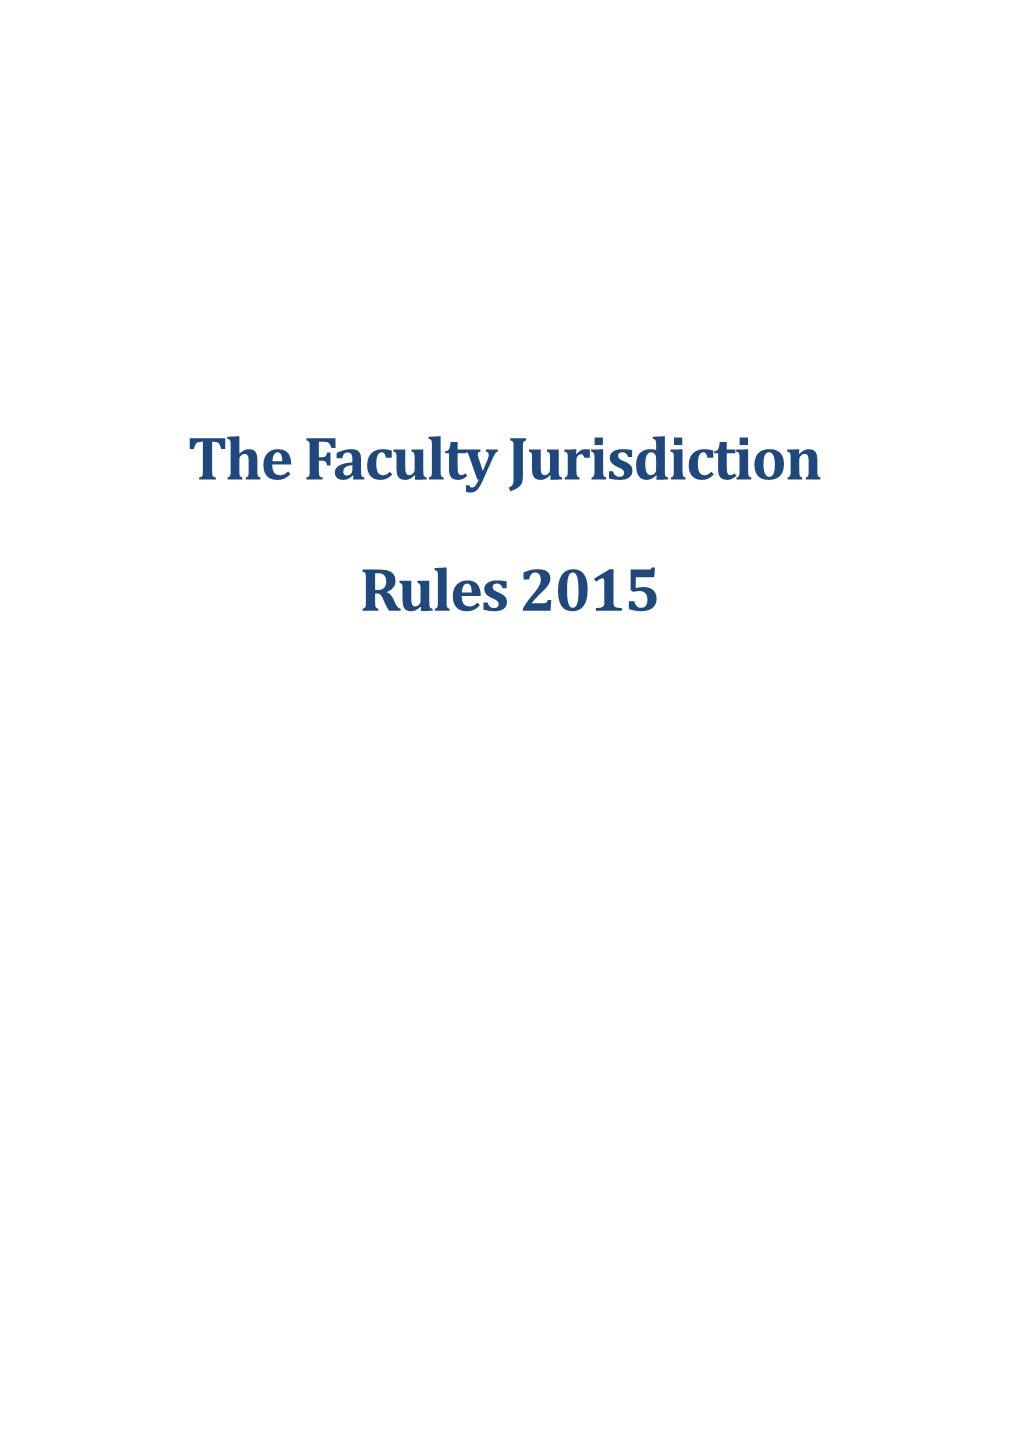 The Faculty Jurisdiction Rules 2015